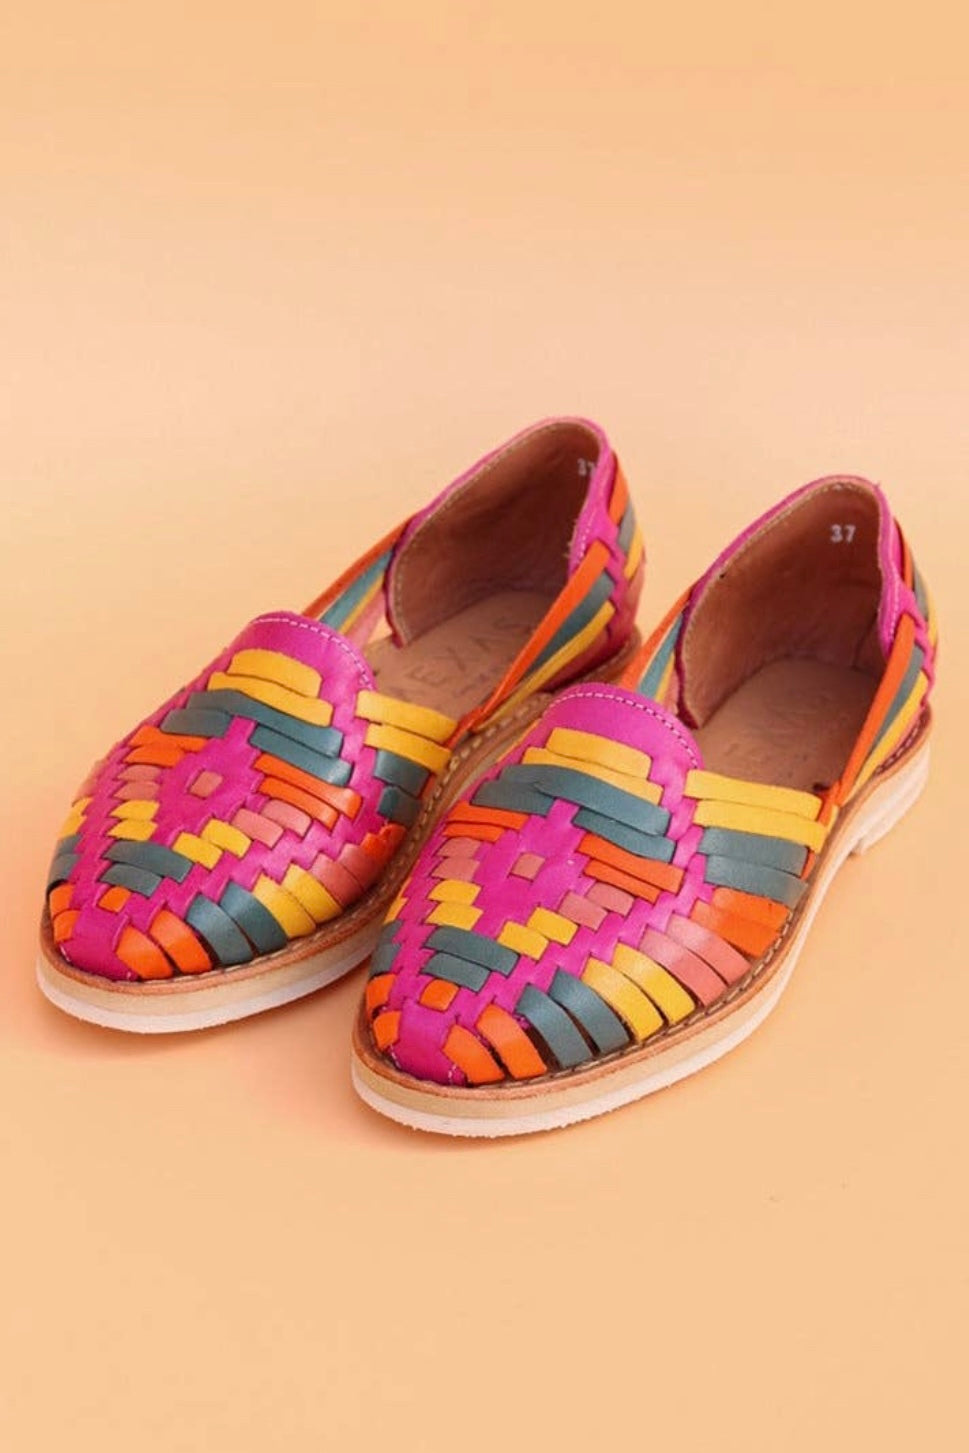 MEXAS Papalote Leather Sandals